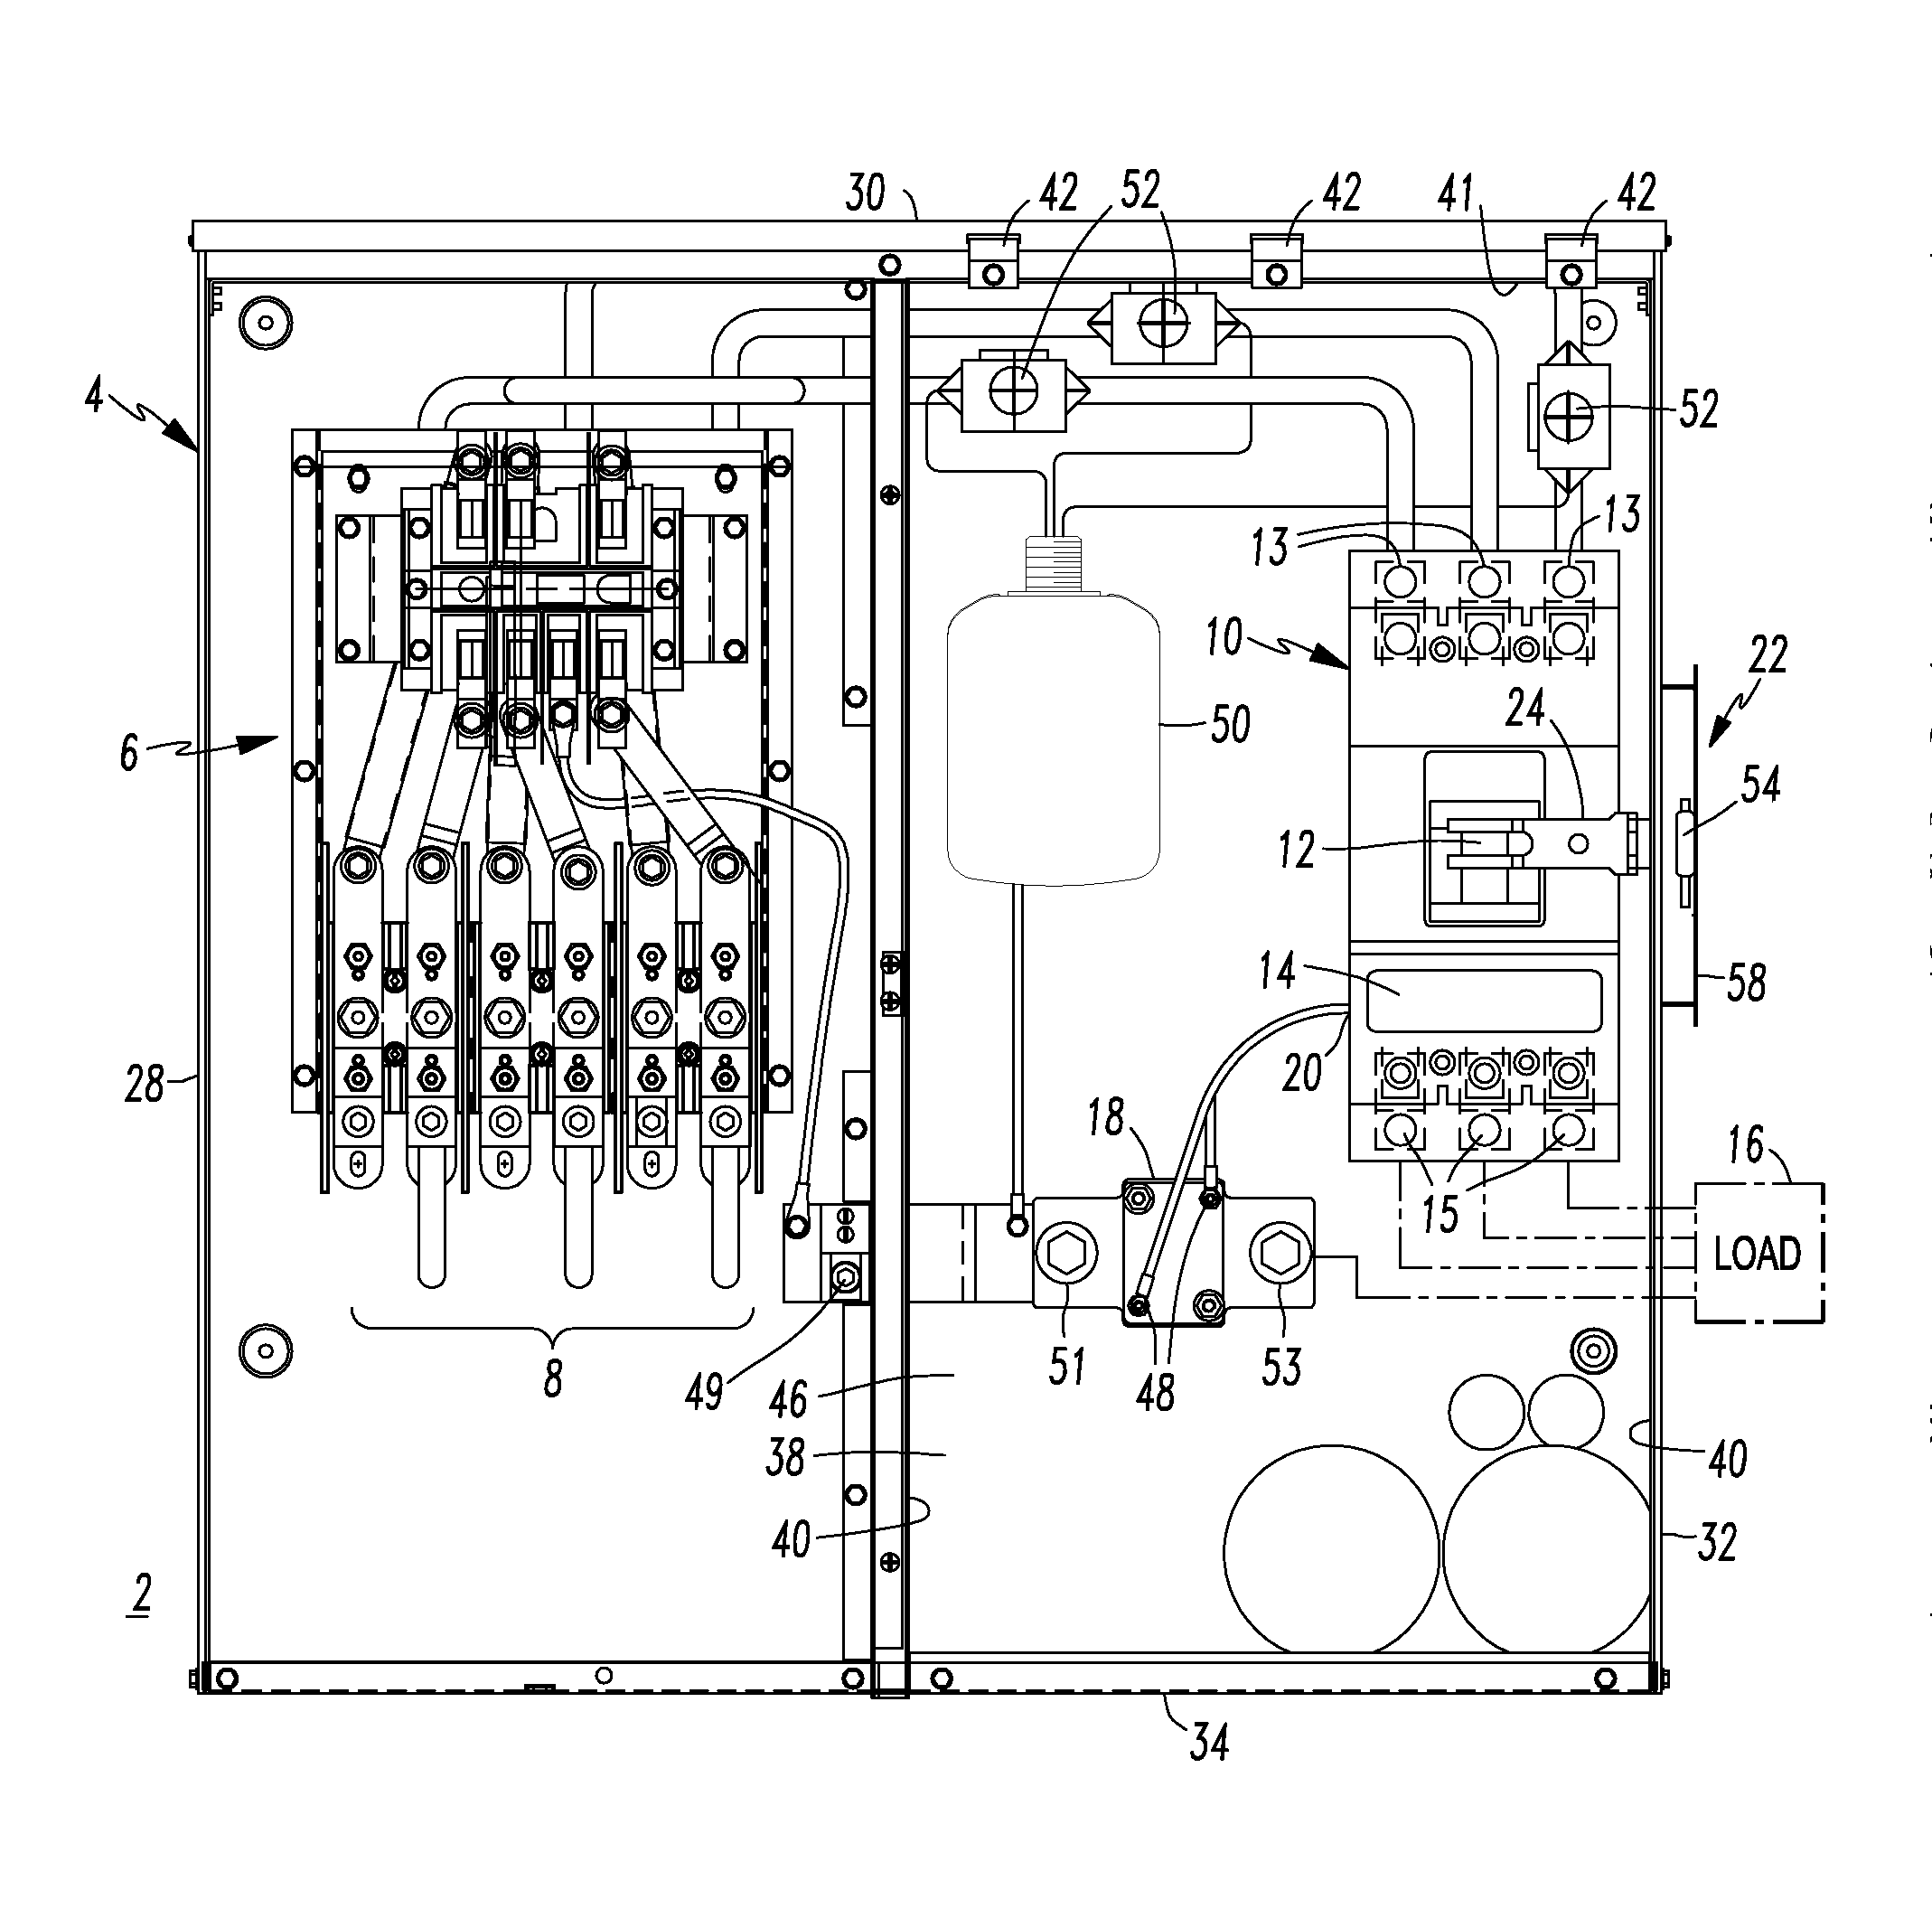 Enclosed metering and protective electrical apparatus including an external disconnect handle